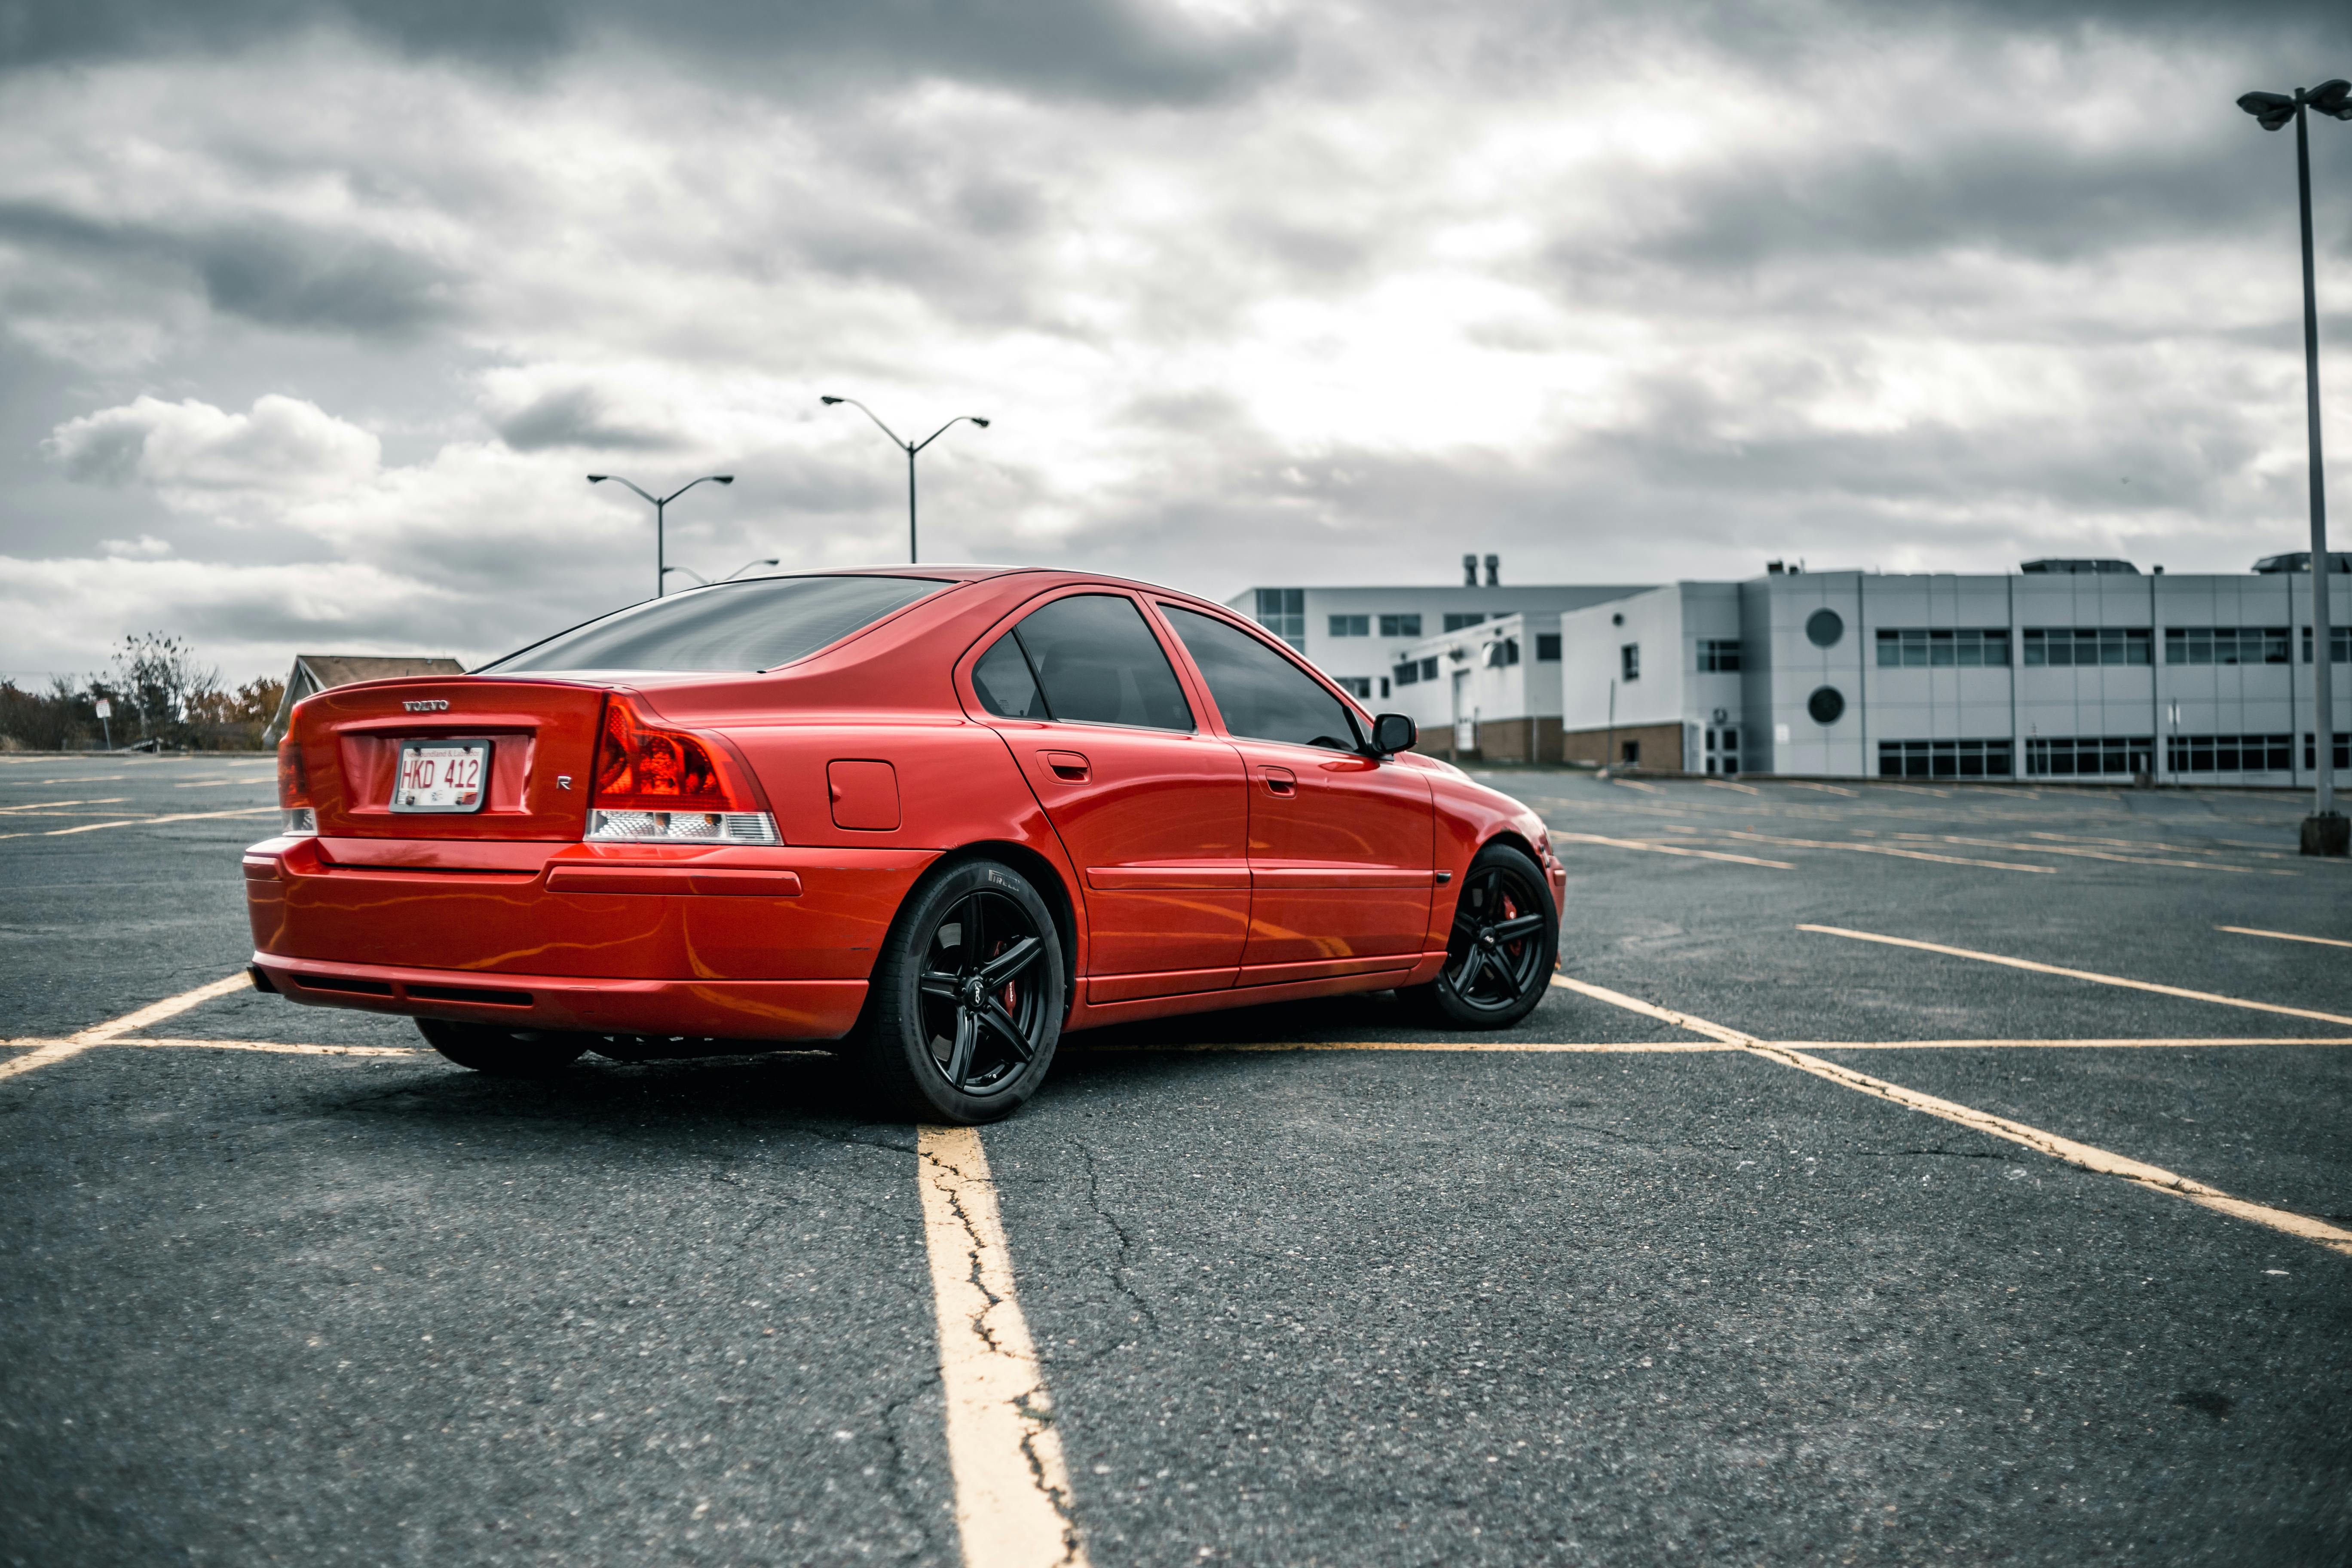 Red Volvo parked in the parking lot. | Photo: Pexels